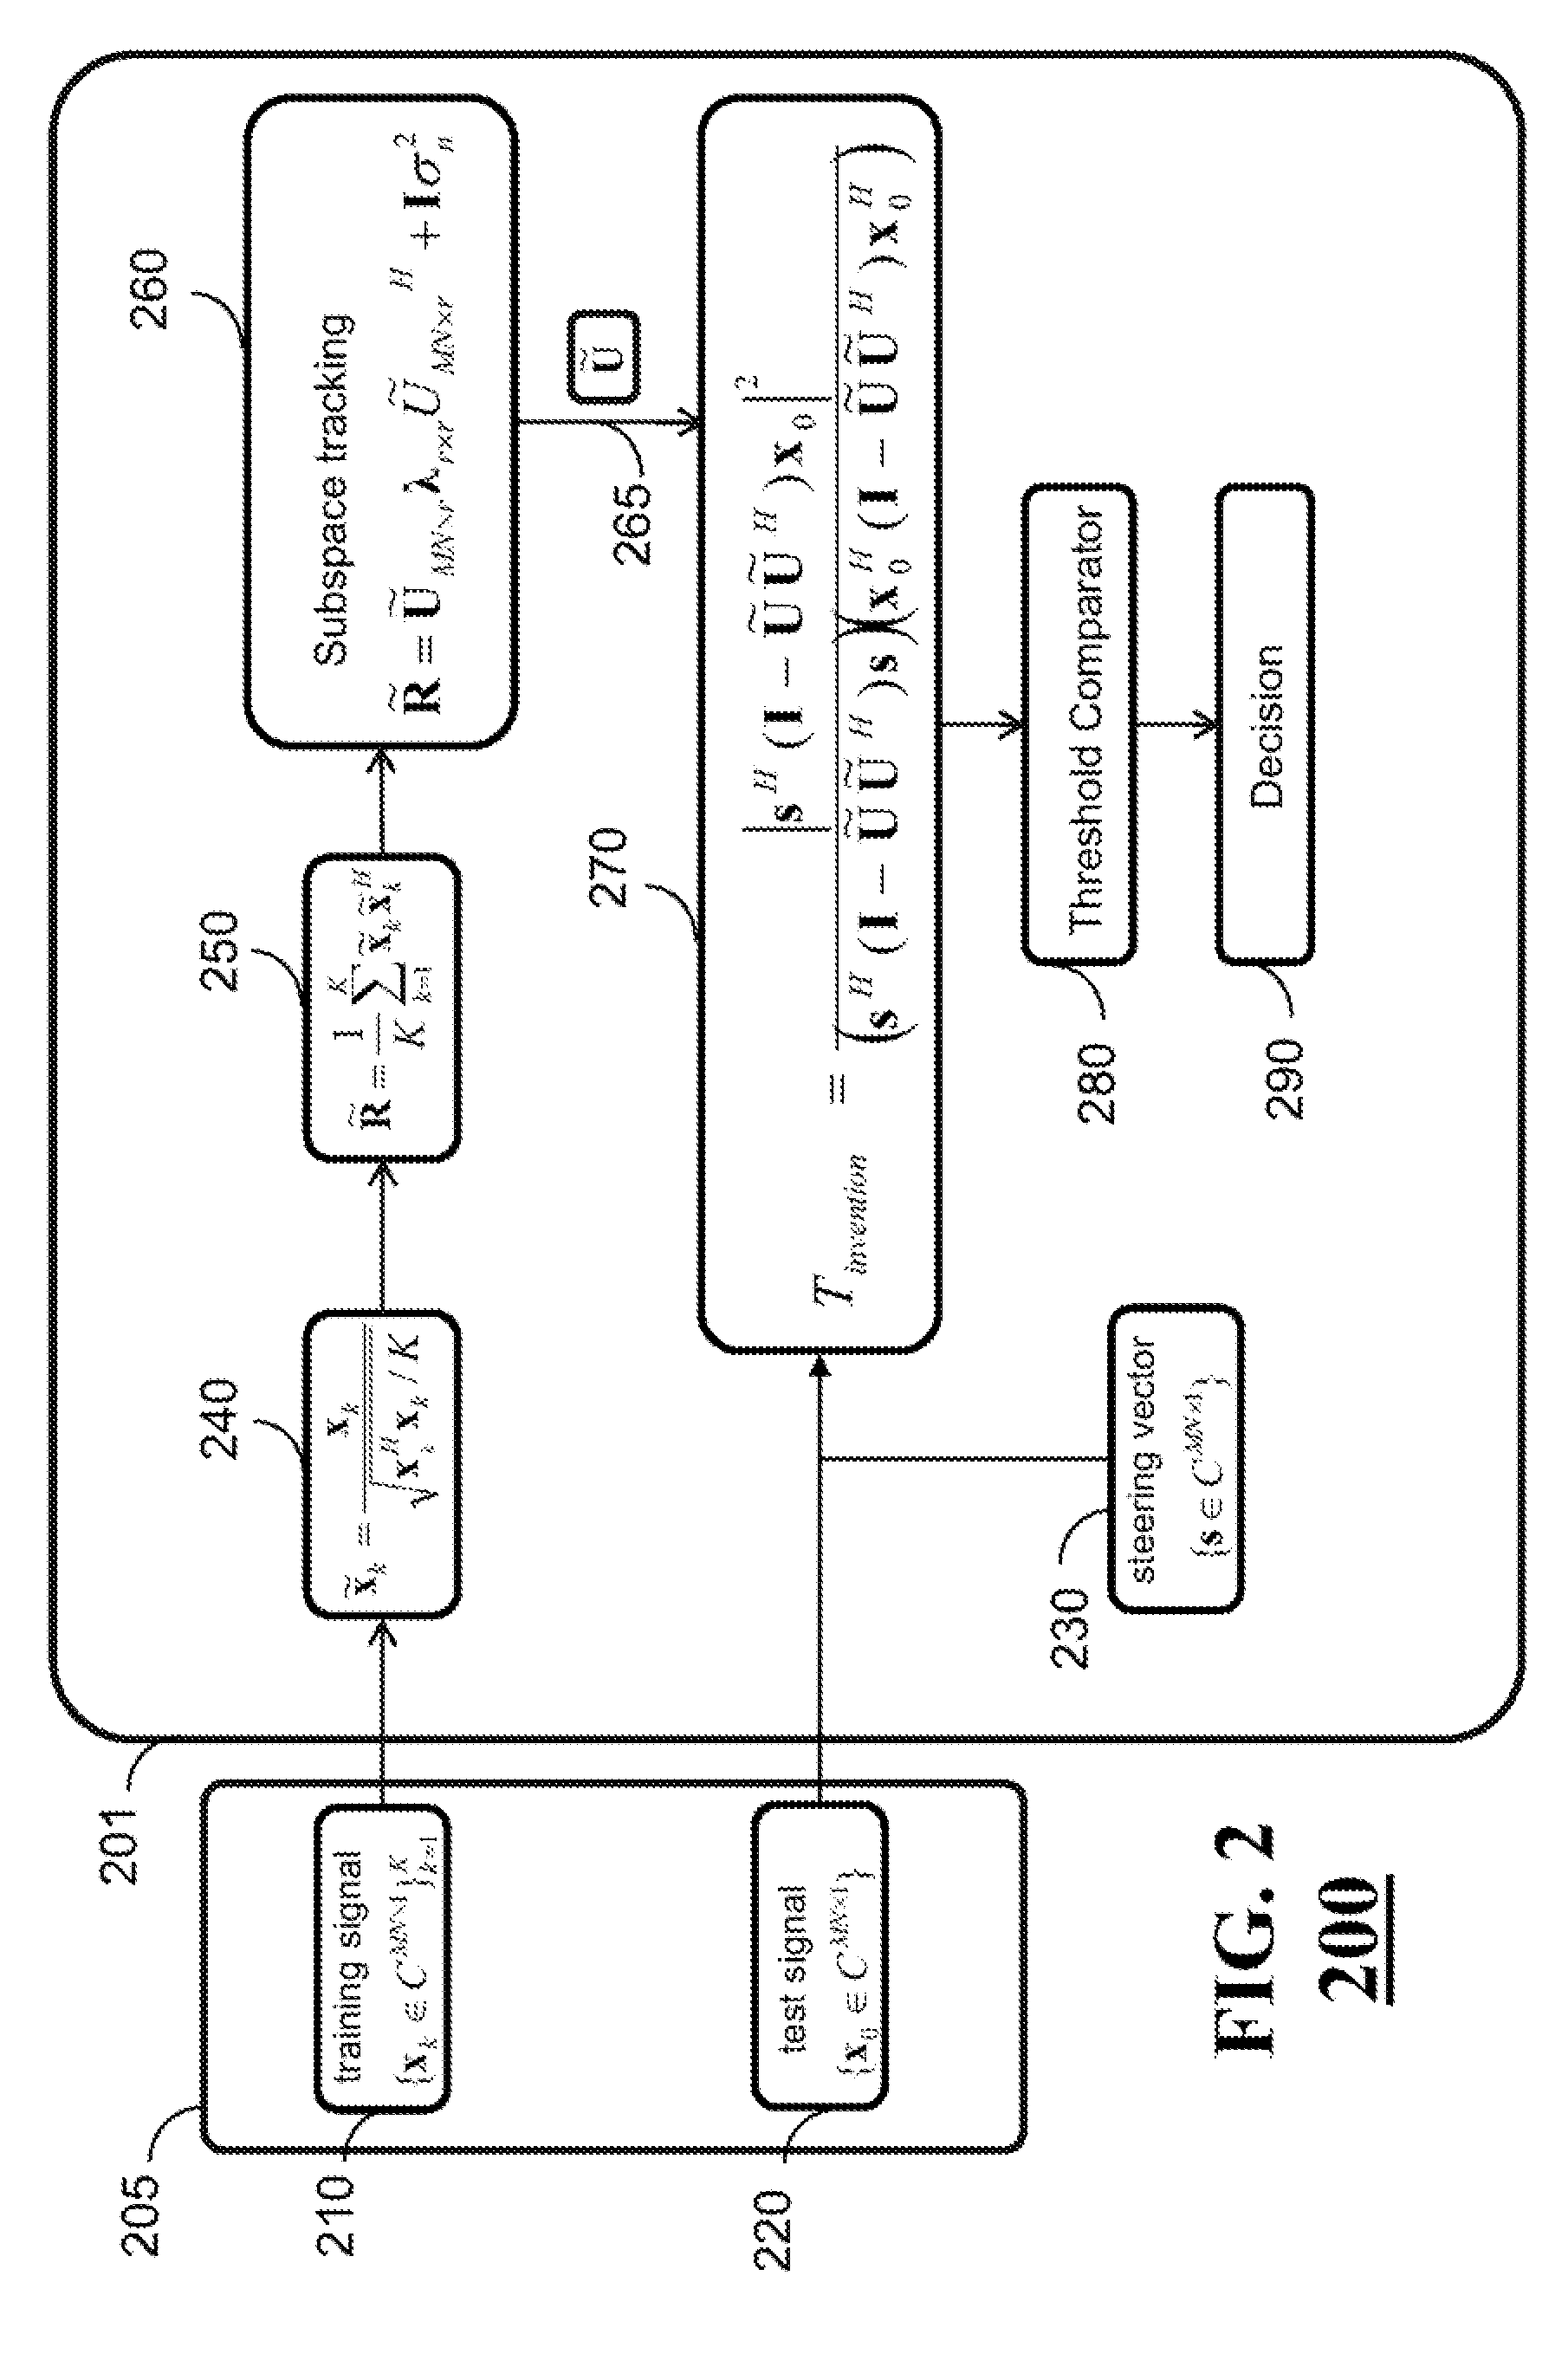 Method for Detecting Targets Using Space-Time Adaptive Processing